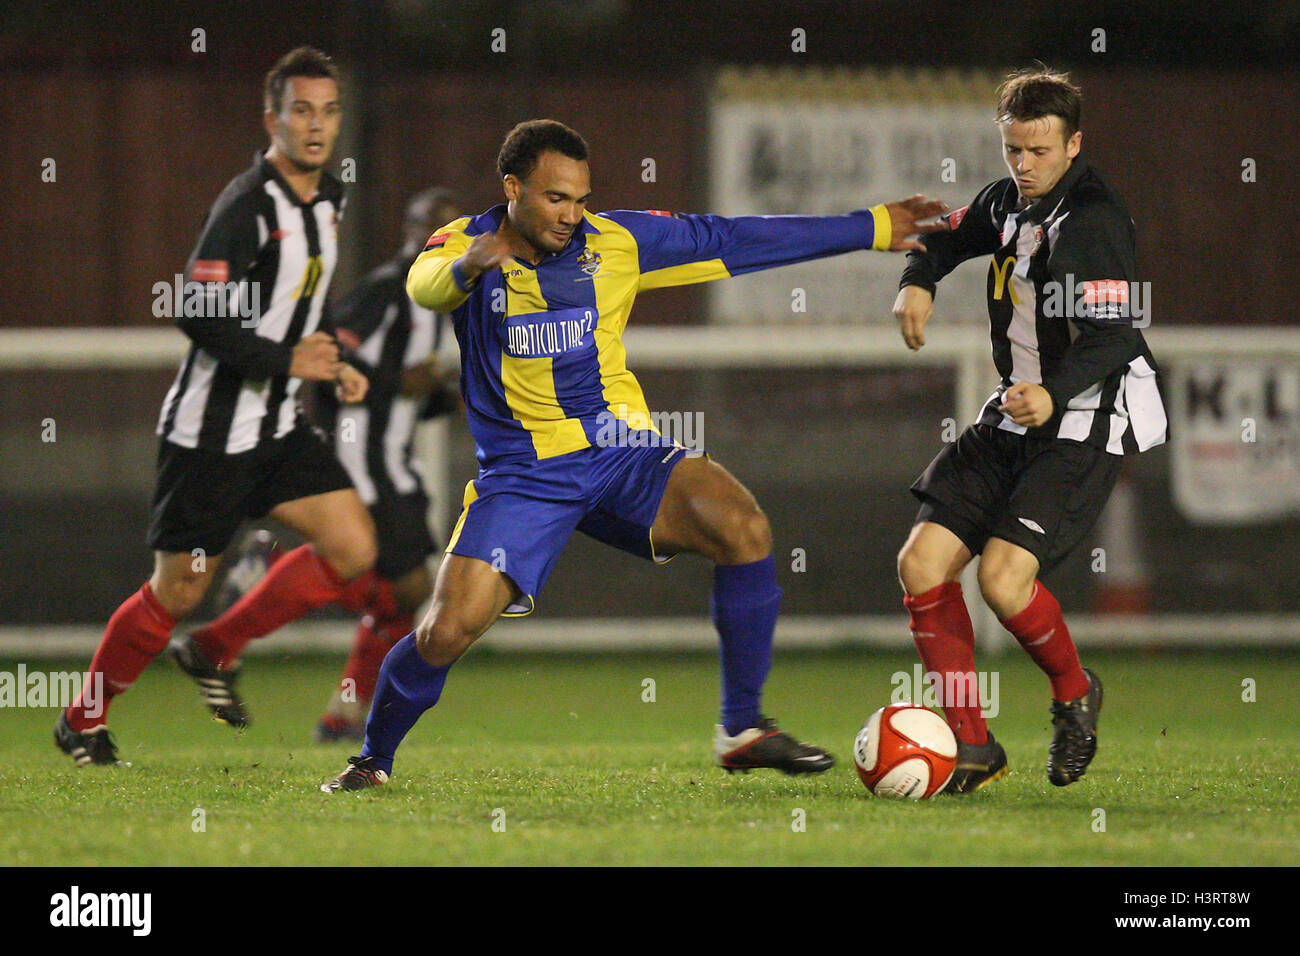 Chuck Duru in action for Romford - Tilbury vs Romford - Ryman League Division One North Football - 12/10/11 Stock Photo